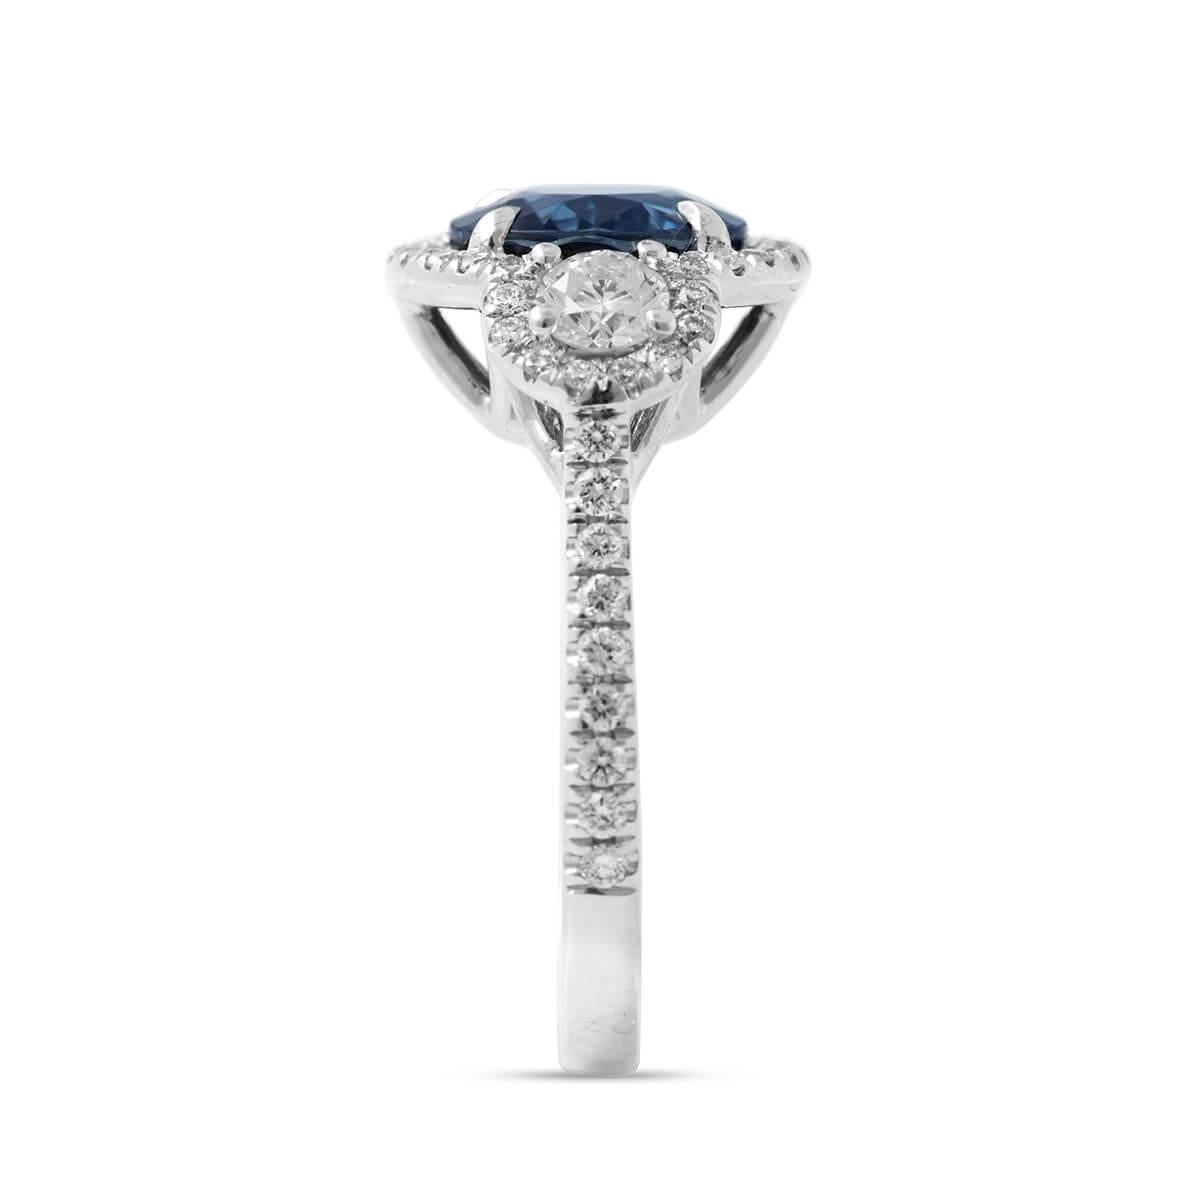 Modern White Gold Oval Blue Sapphire Ring with White Diamonds, 3.88 Carat